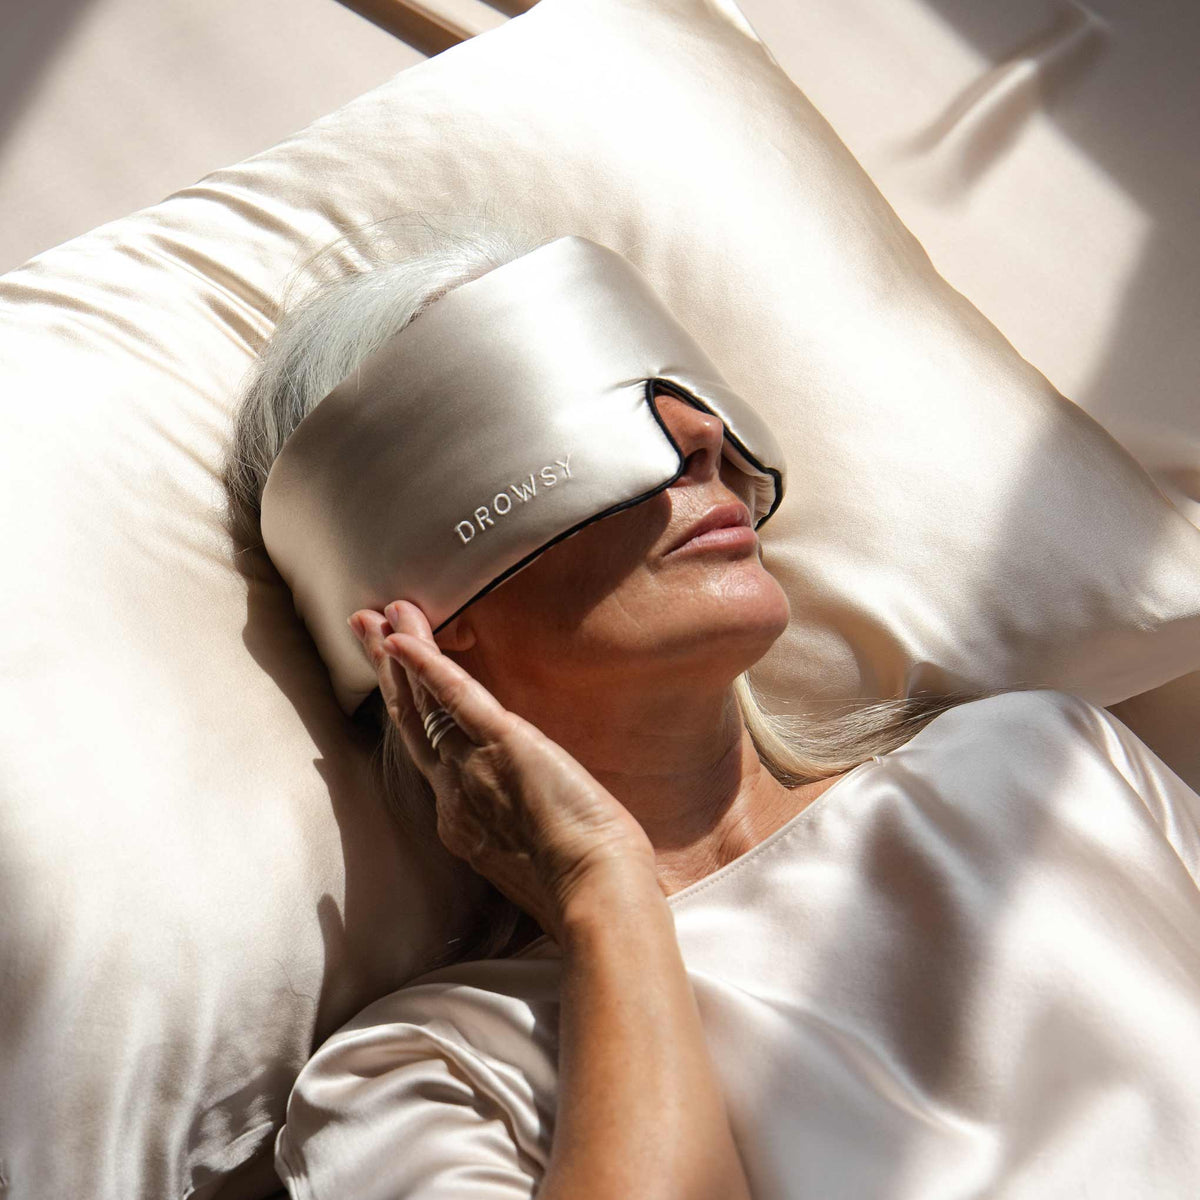 Model with blue coloured Drowsy sleep mask covering eyes on blue silk sheets